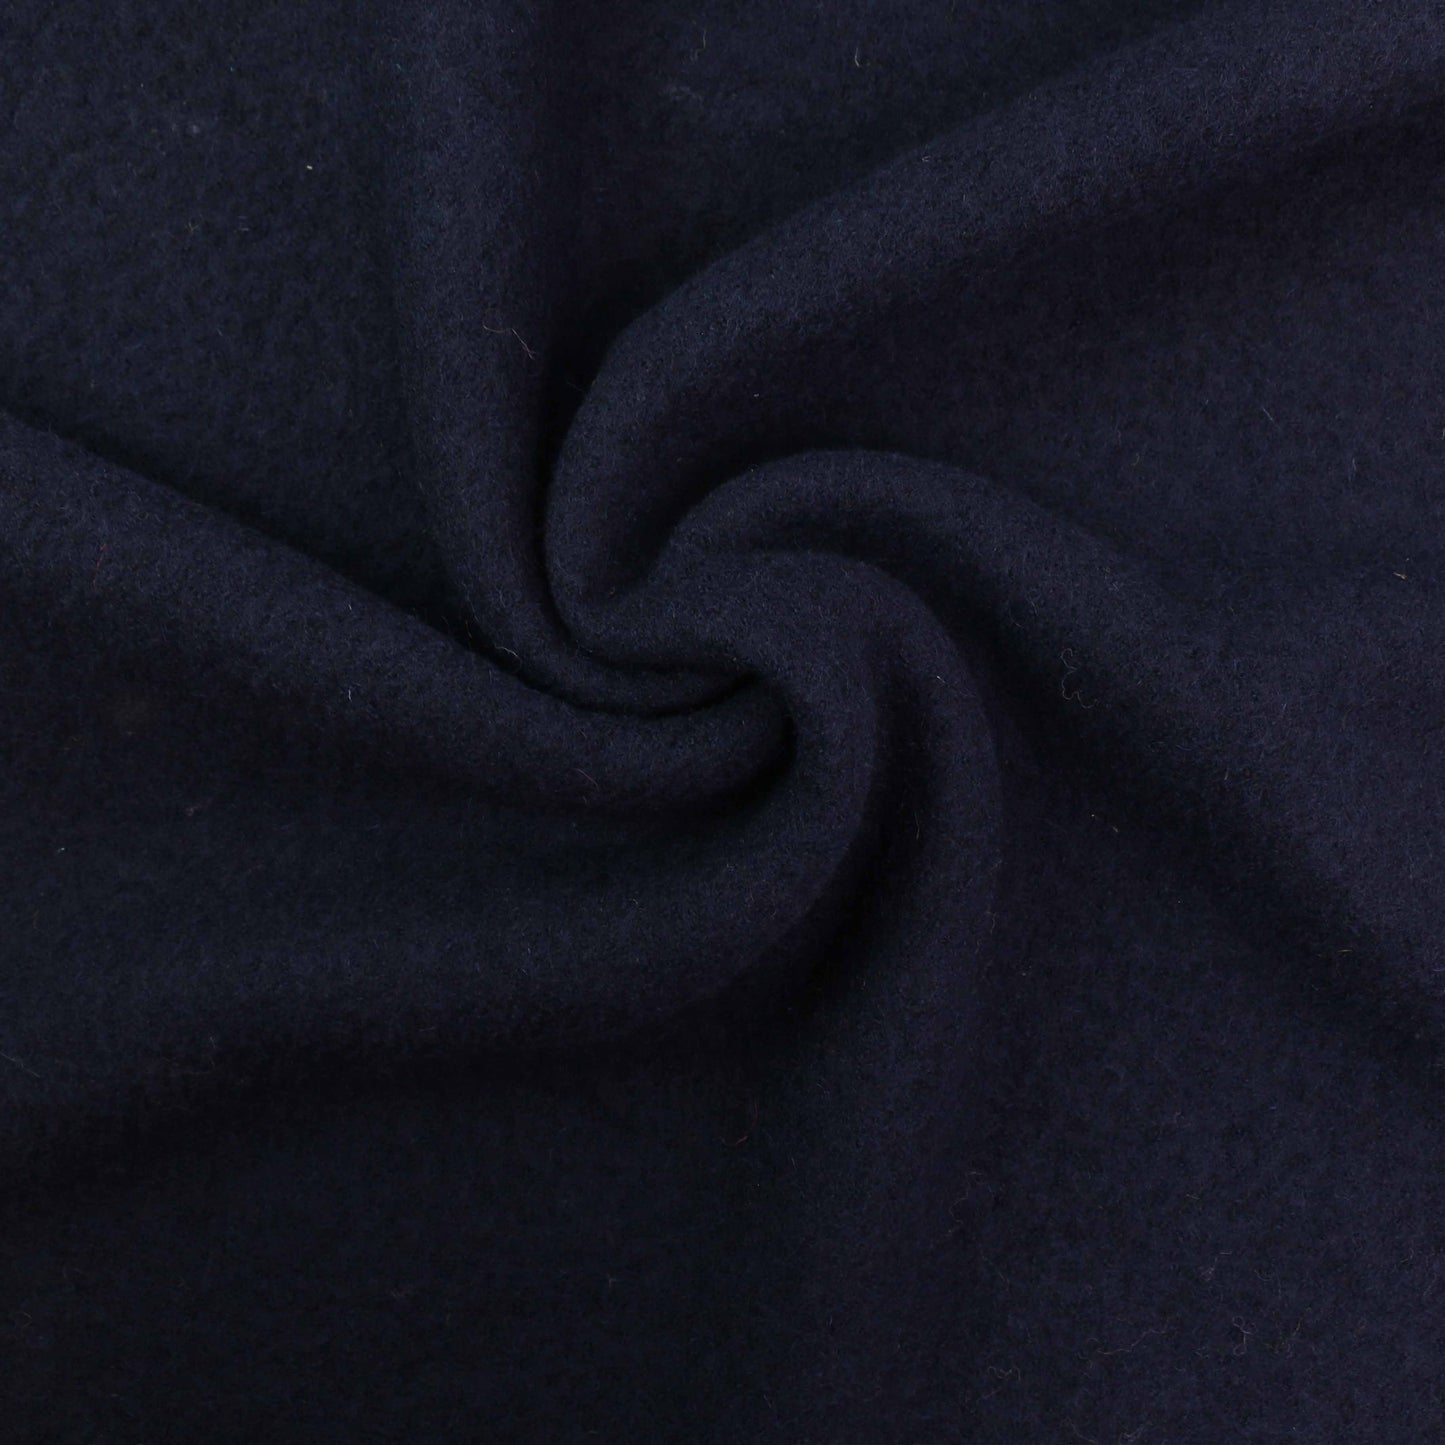 Boiled Wool Fabric - Mustard, charcoal, black, navy, teal